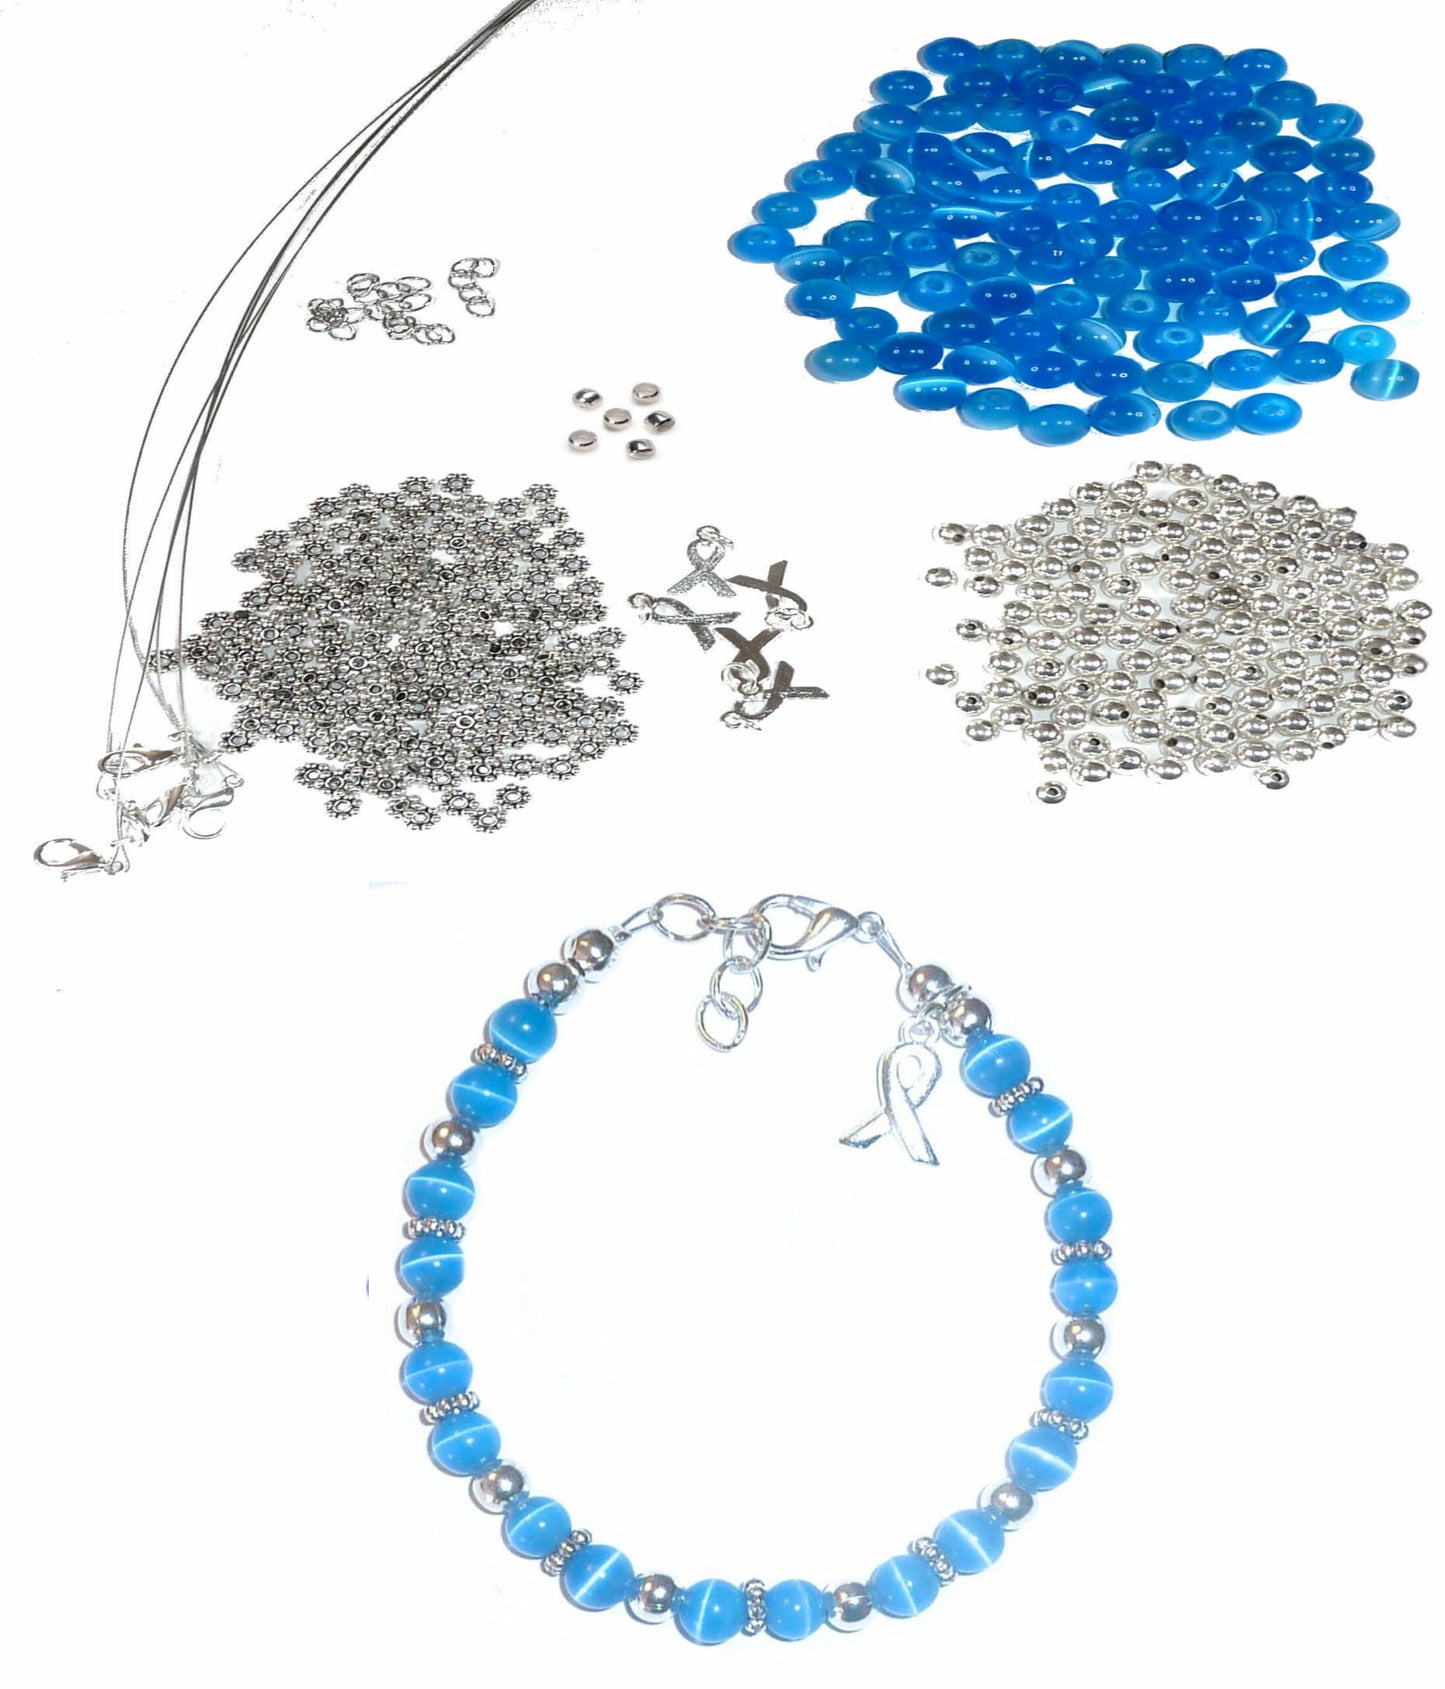 DIY Kit, Everything You Need to Make Cancer Awareness Bracelets, Uses Wire, Crimps and Clasps, Makes 5 - Blue (Colon Cancer)